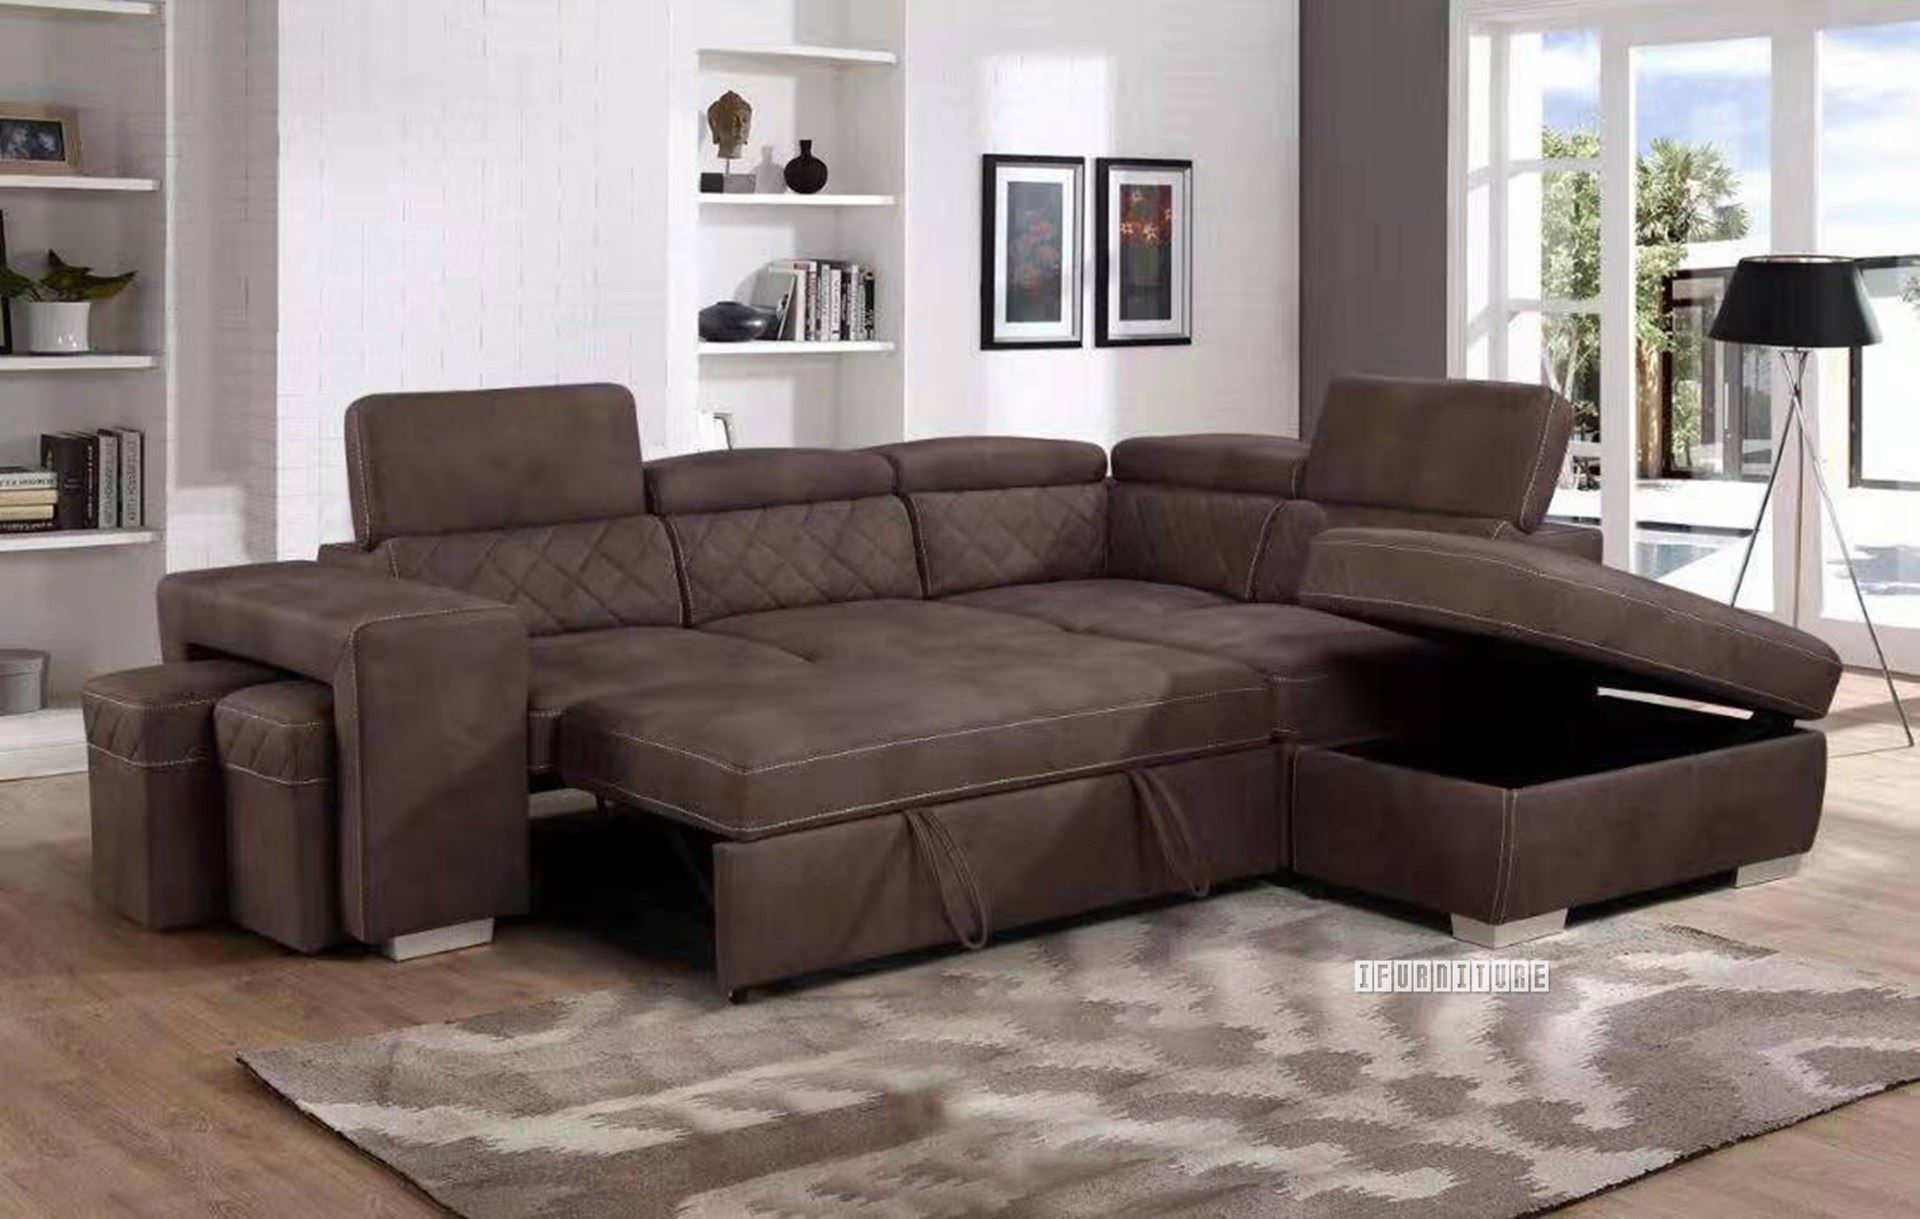 Aria Sectional Sofa/sofa Bed With Storage & 2 Ottomans (brown) Intended For Sofas With Ottomans In Brown (View 15 of 20)